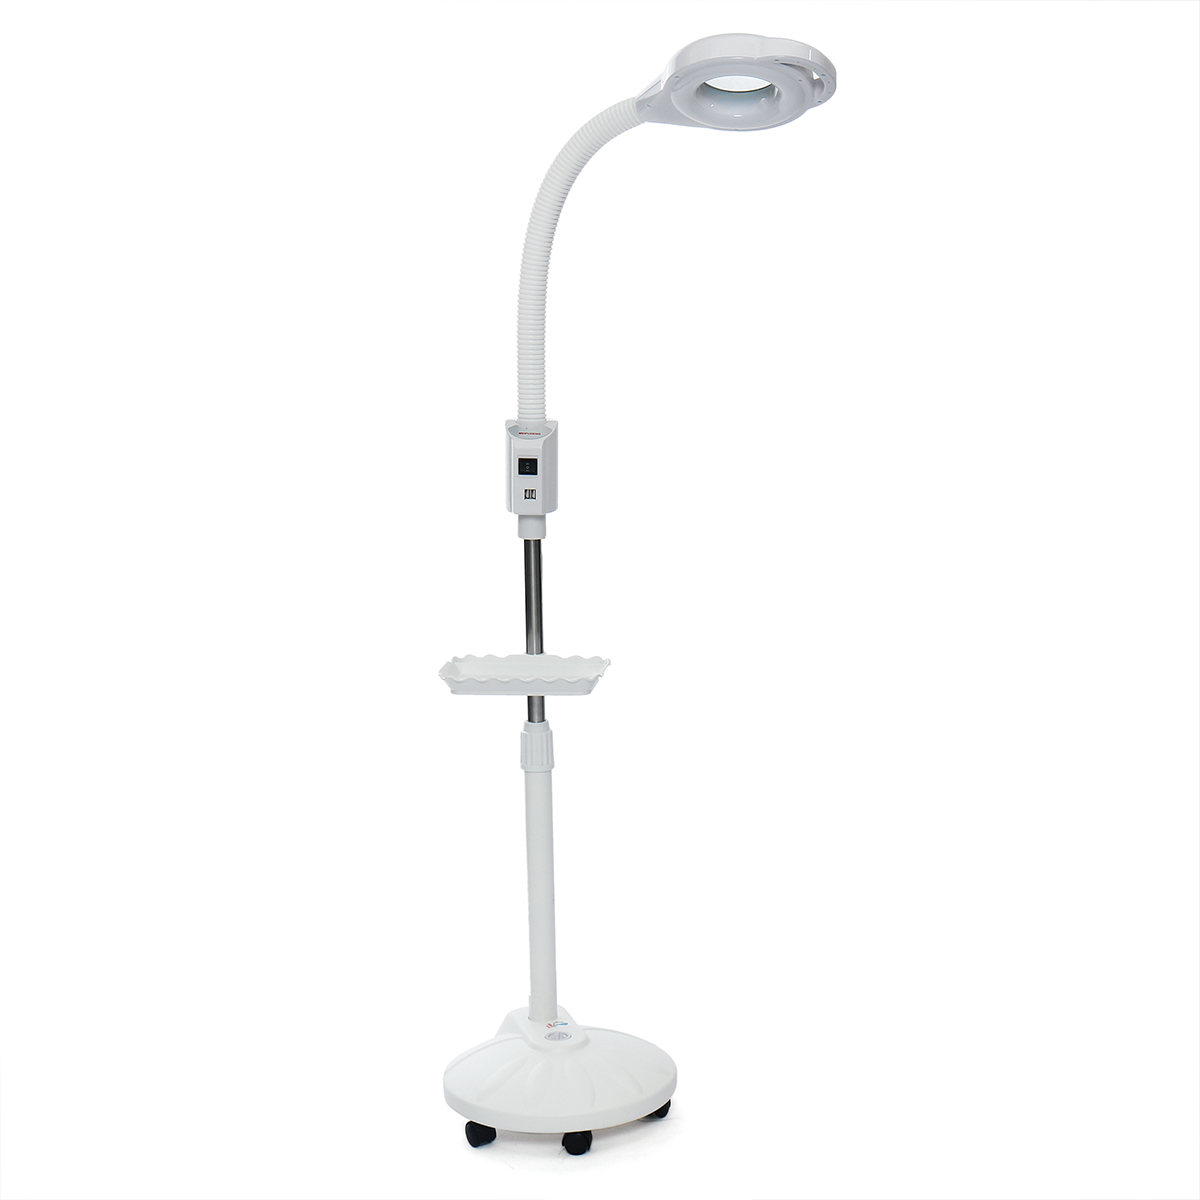 220v-240V-16X-Diopter-LED-Magnifying-Beauty-Light-ColdWarm-Floor-Stand-Lamp--Work-Light-For-Beauty-S-1563680